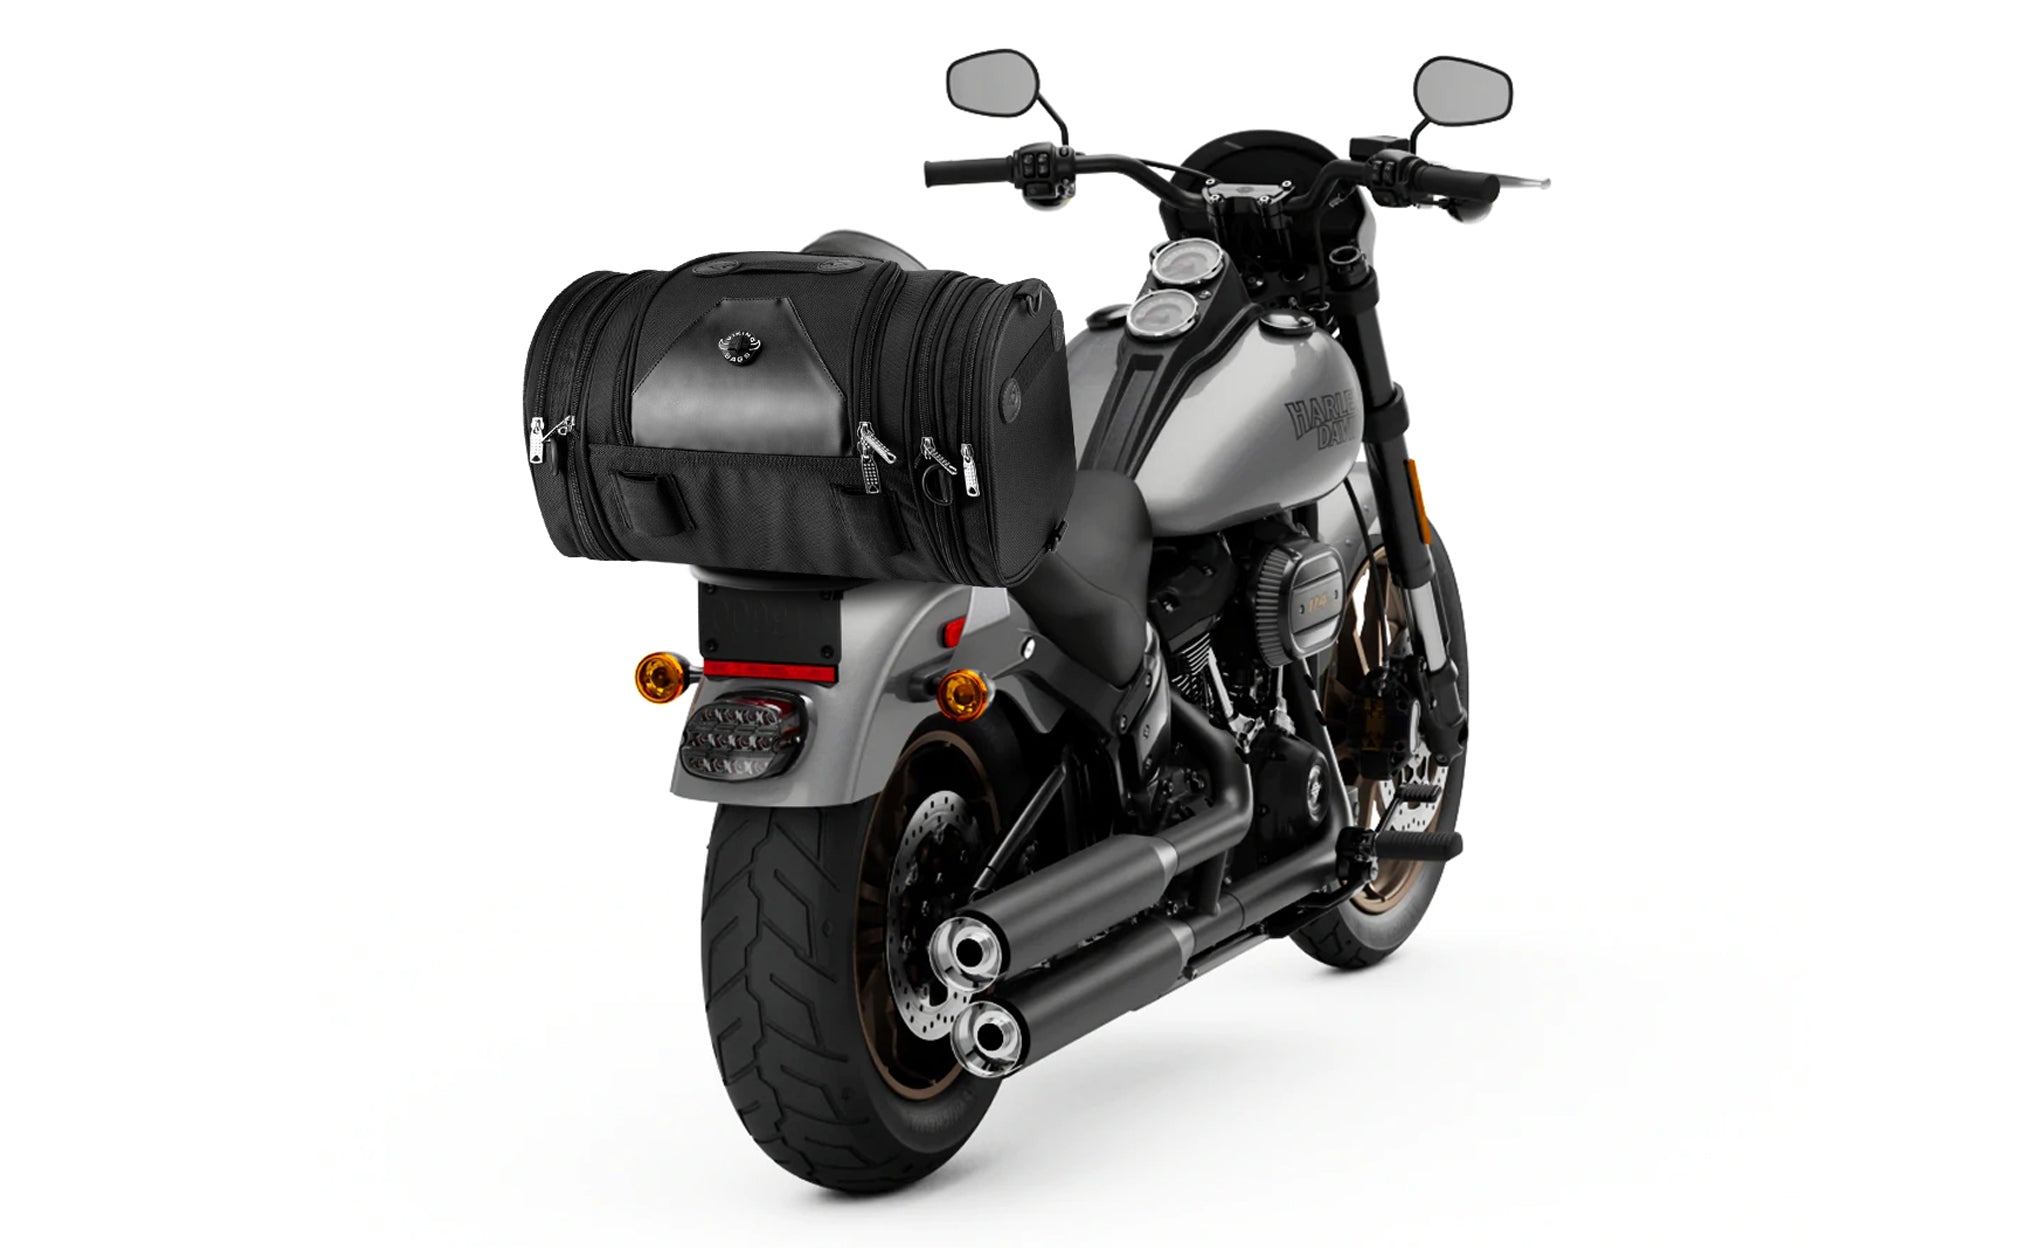 Viking Axwell Small Victory Motorcycle Sissy Bar Bag Bag on Bike View @expand